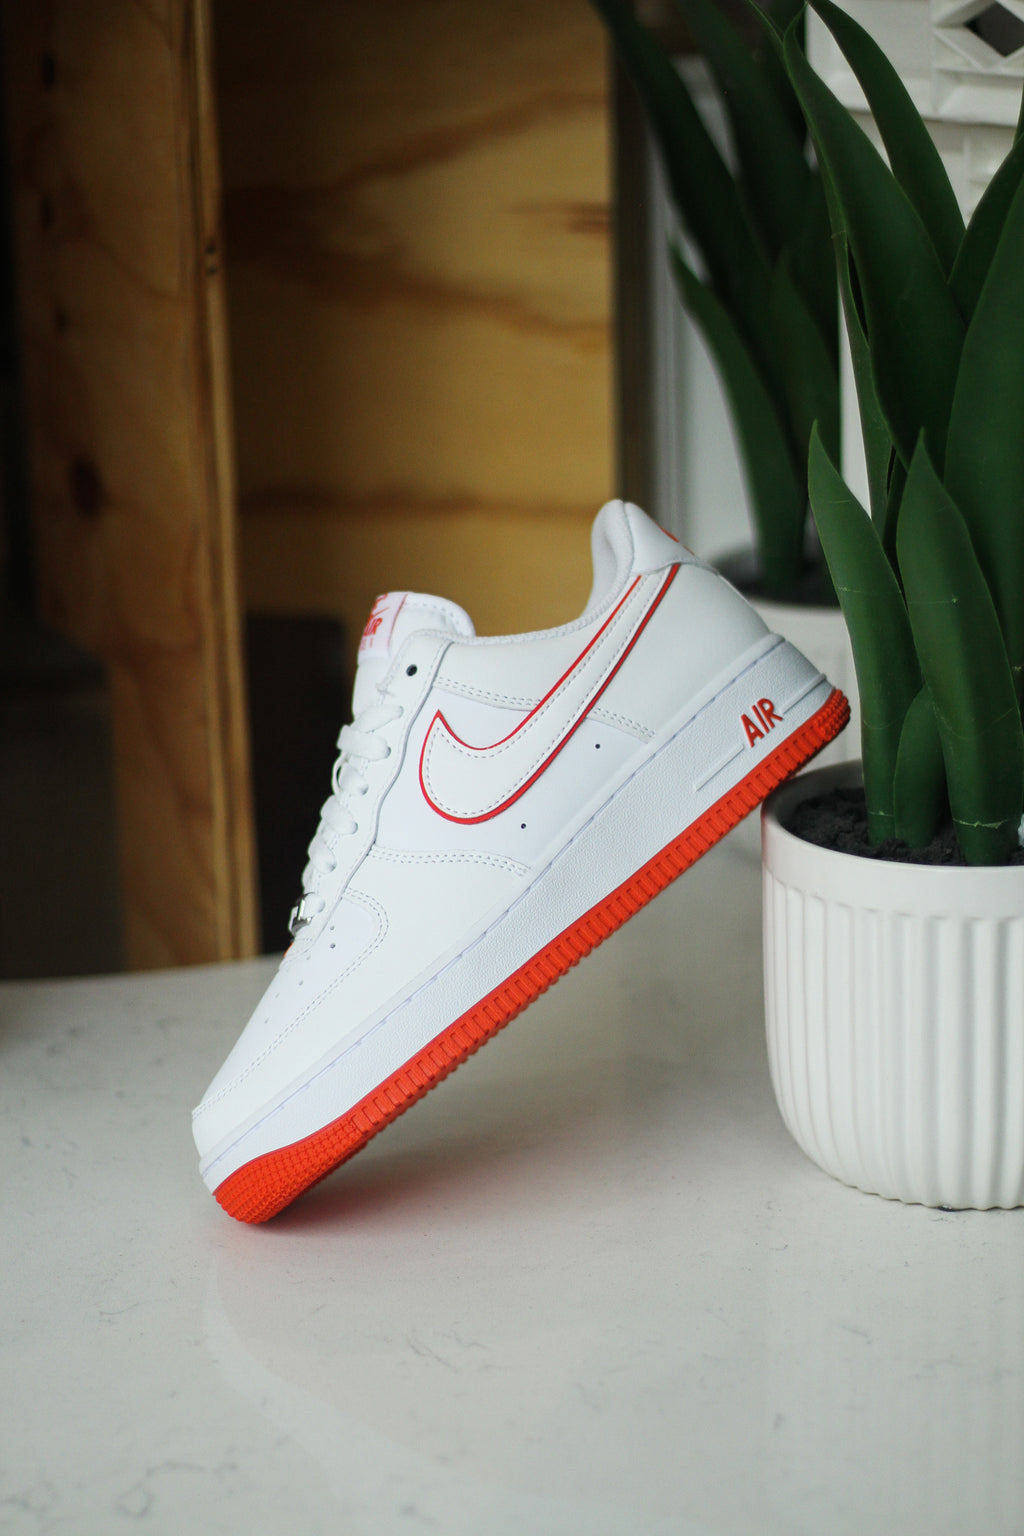 AIR FORCE 1 '07 WHITE/PICANTE RED